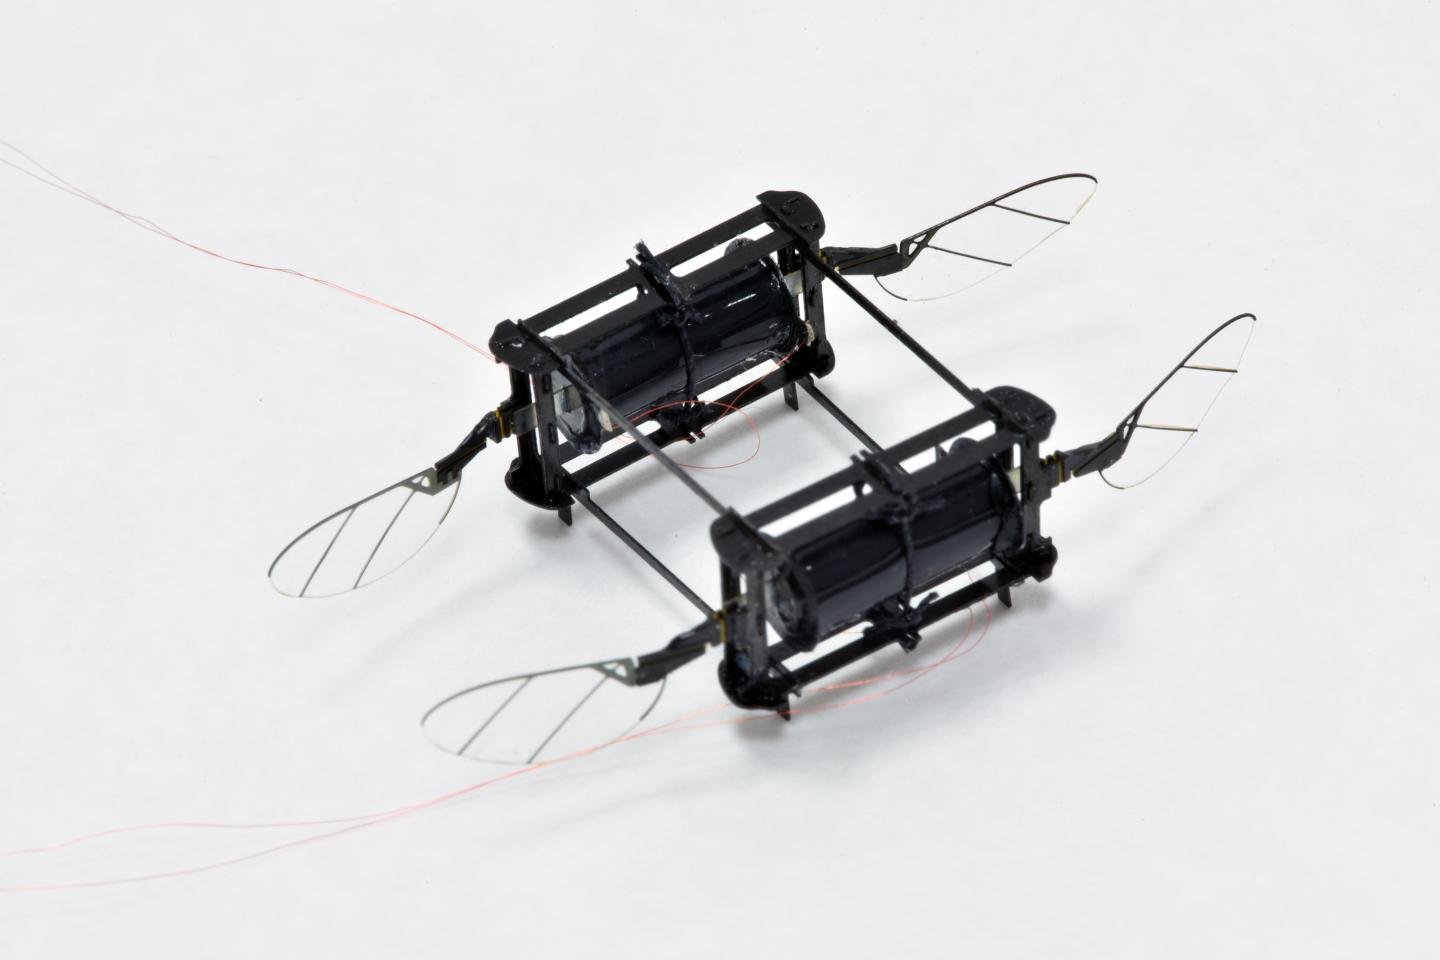 A four-wing, two actuator model could fly in a cluttered environment, overcoming multiple collisions in a single flight. Source: Harvard Microrobotics Lab